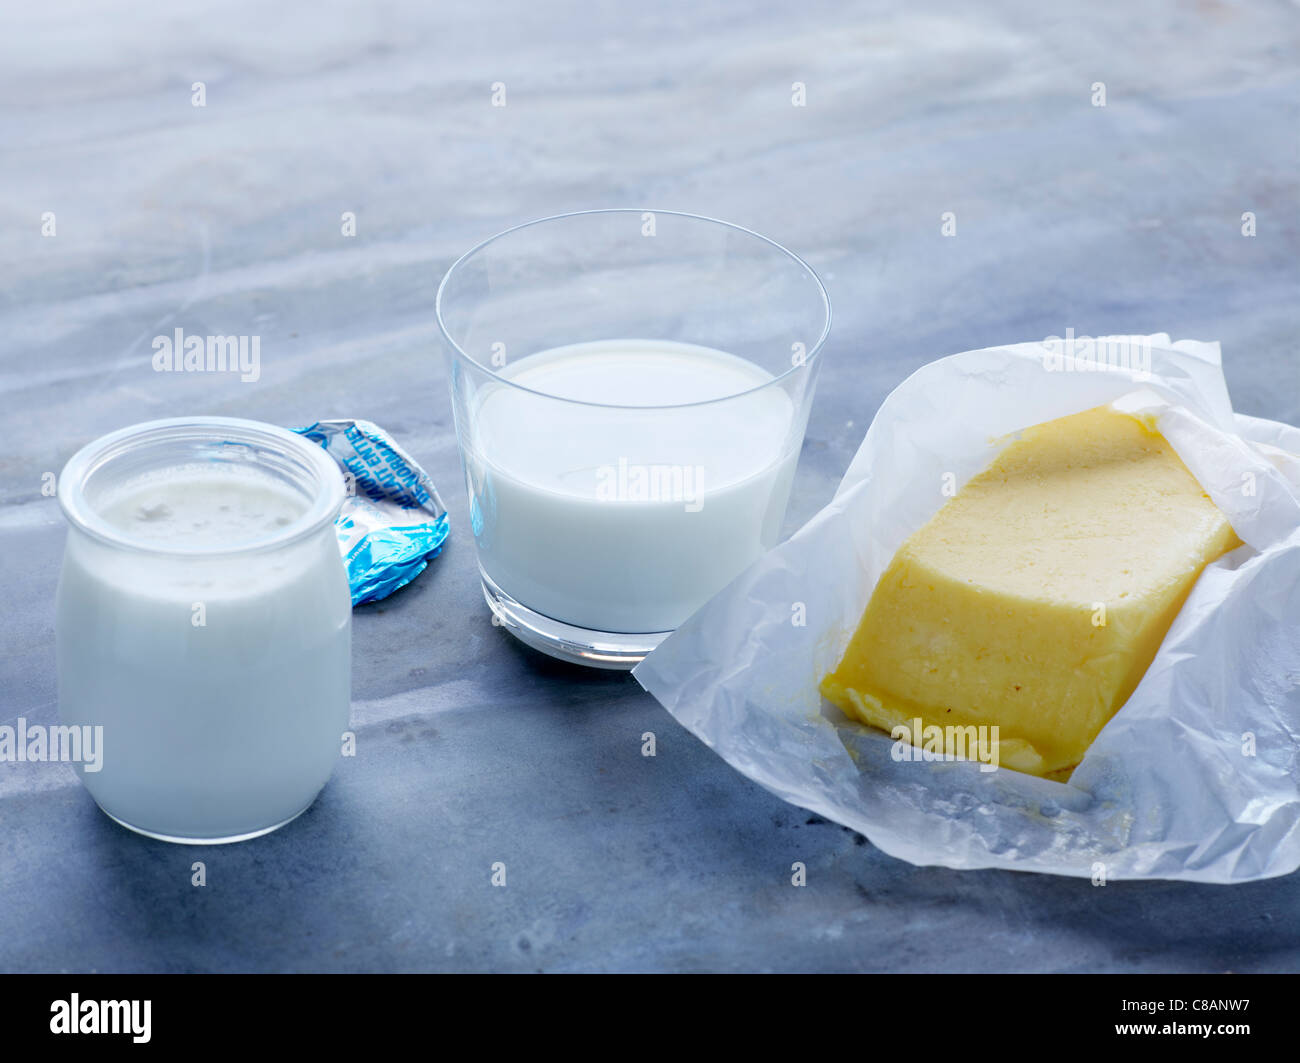 Slab of butter,yoghurt and a glass of milk Stock Photo